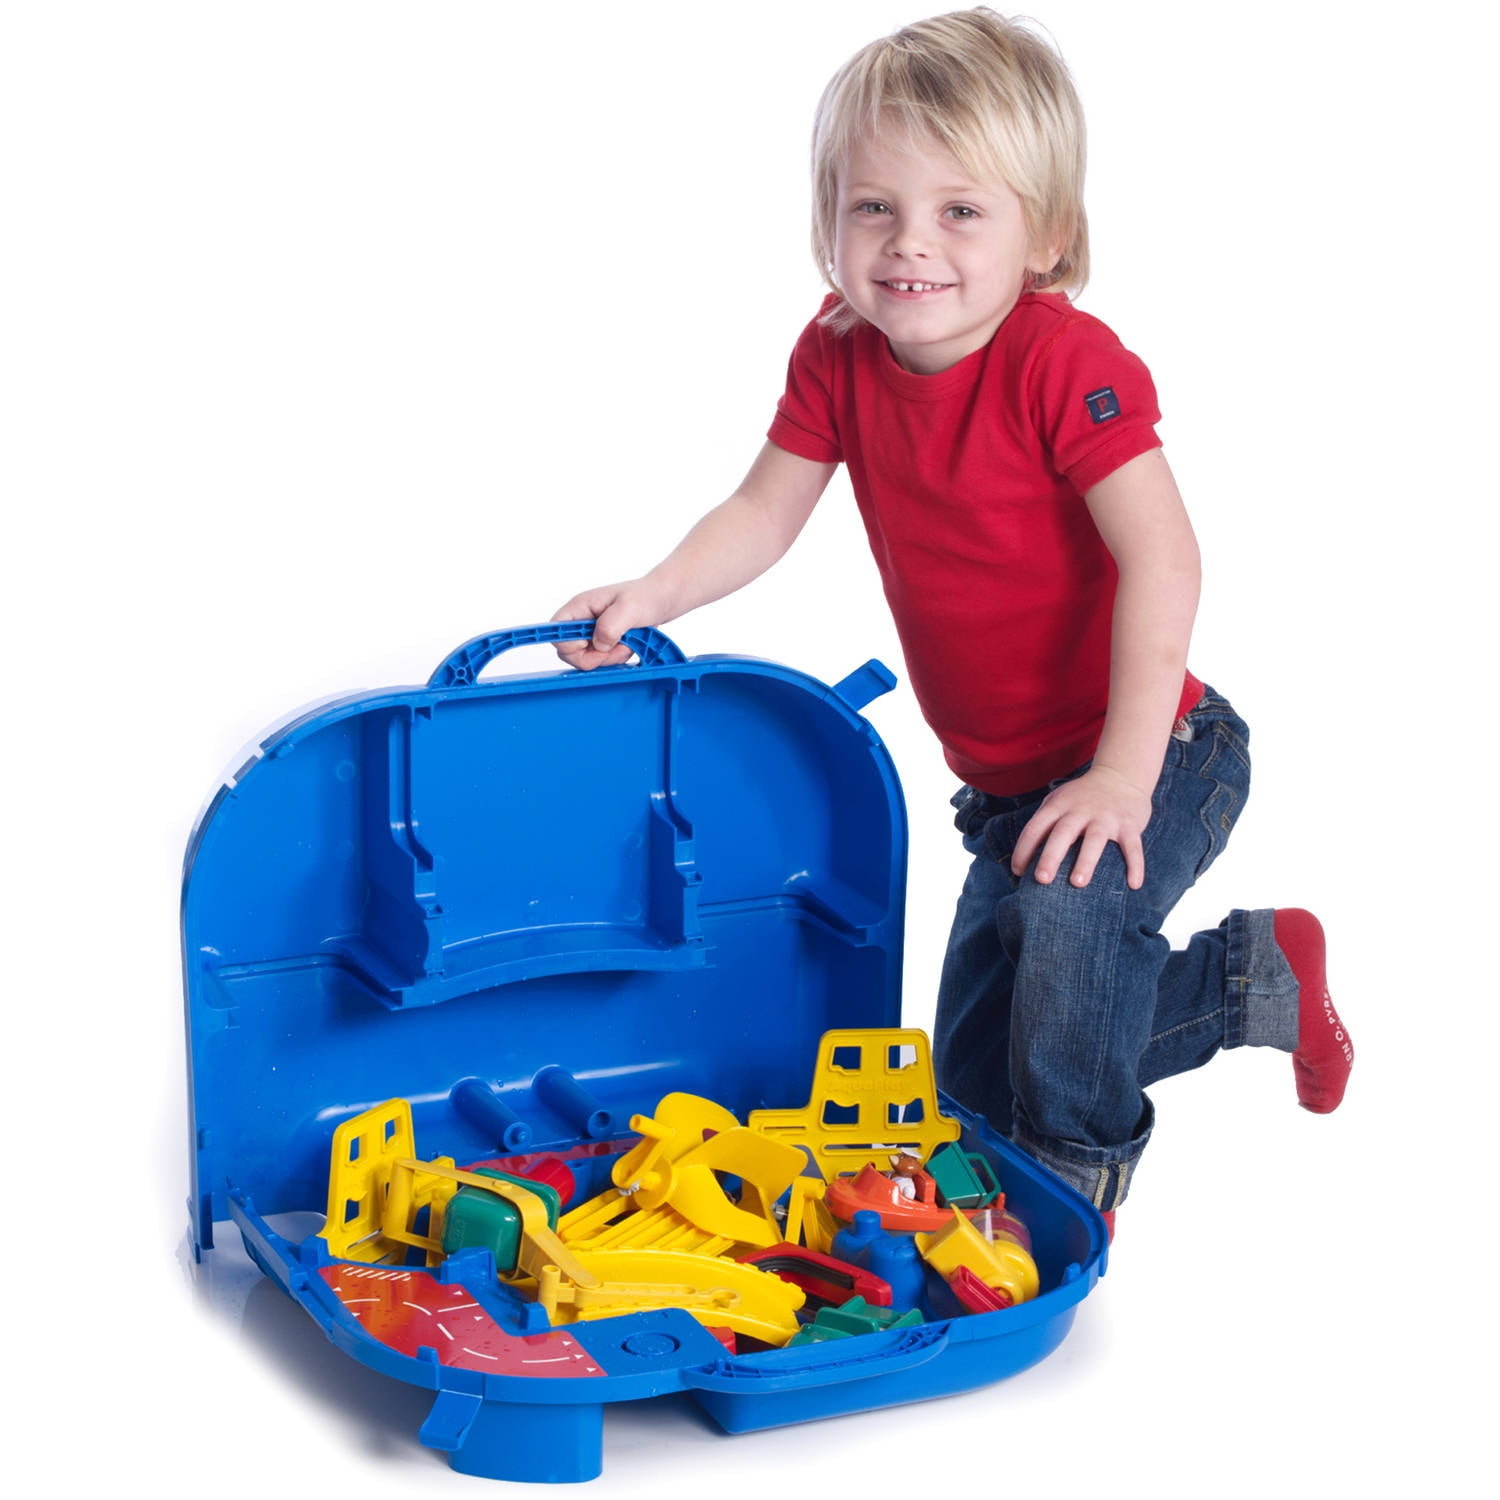 Buy Aquaplay Lock Box Playset Online at Low Prices in India 